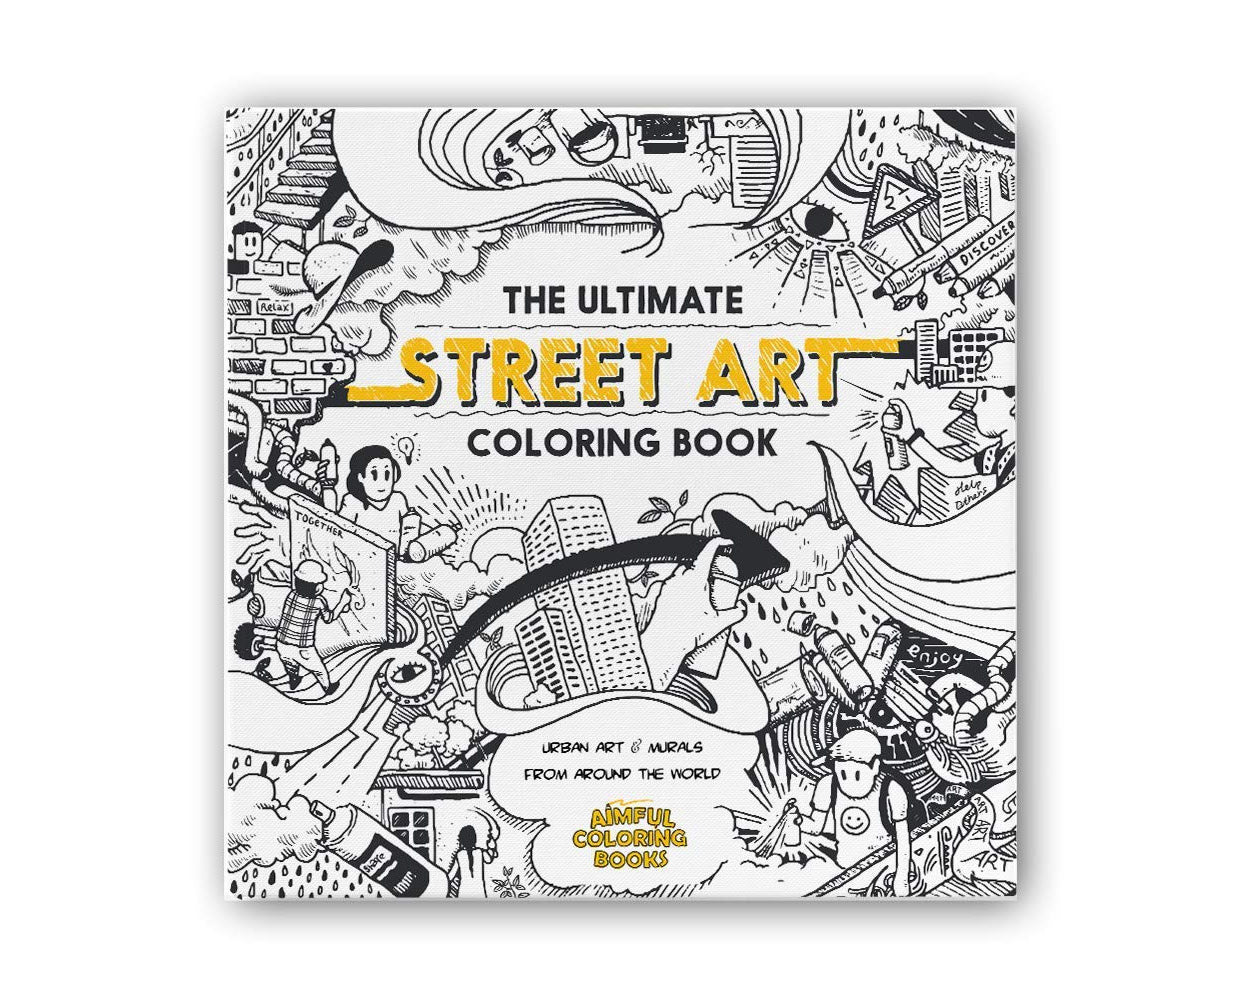 The Ultimate street art coloring book